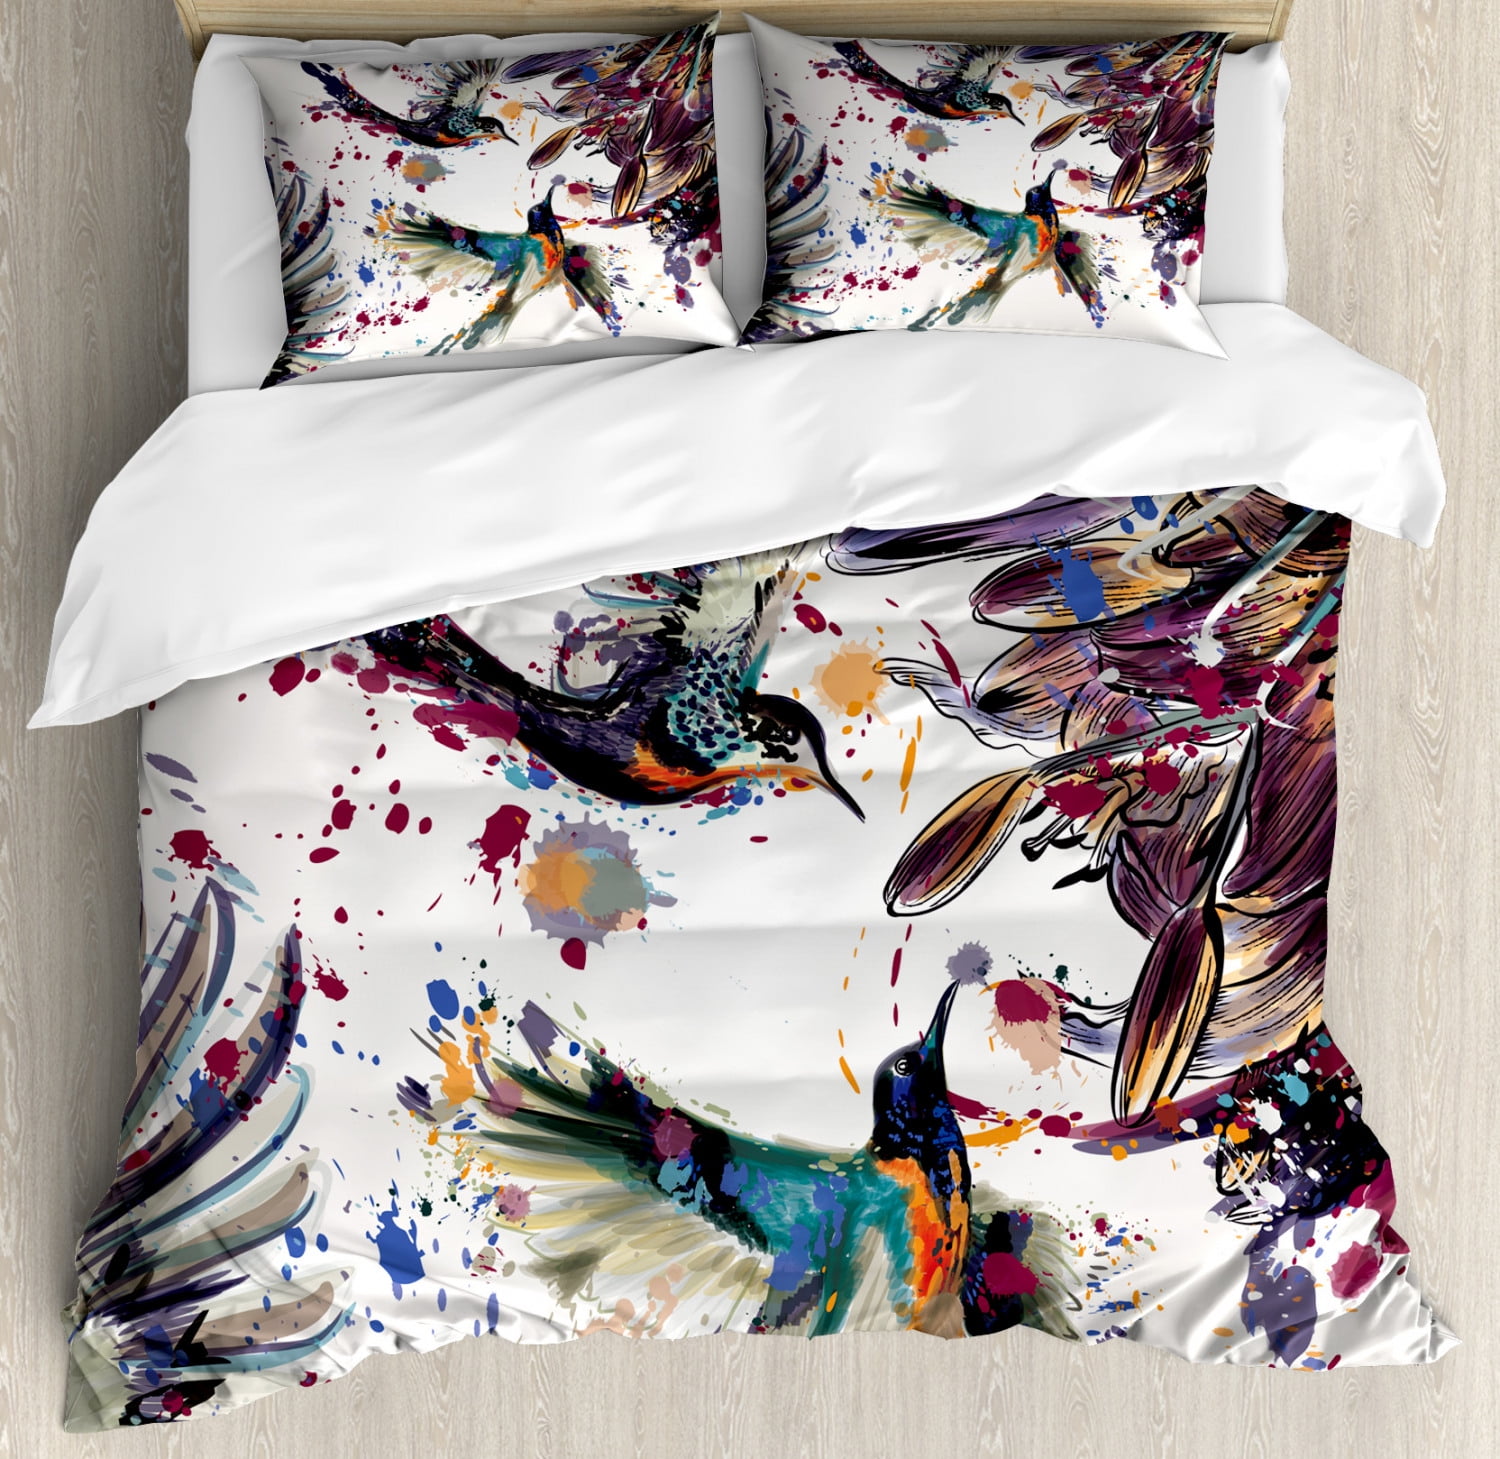 Decorative 3 Piece Bedding Set with 2 Pillow Shams Floral Patterned Illustration with Leaves and Wildflowers Abstract Botanical Violet Blue Queen Size Ambesonne Watercolor Duvet Cover Set